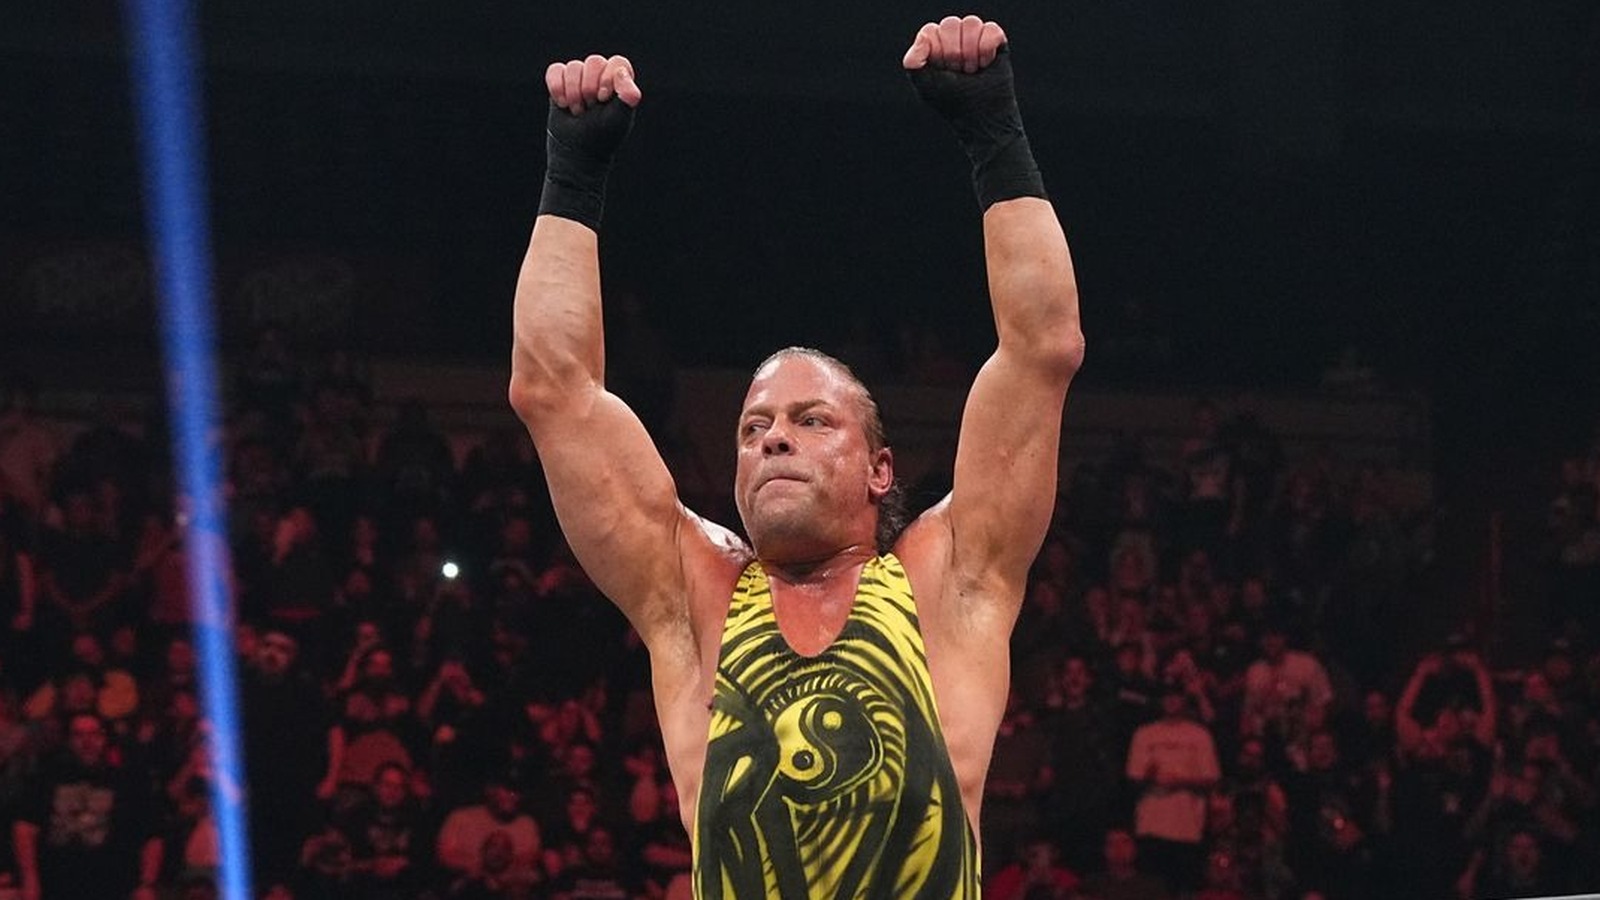 WWE Hall Of Famer Rob Van Dam Points To Wrestling Feat He Could Be The First To Do